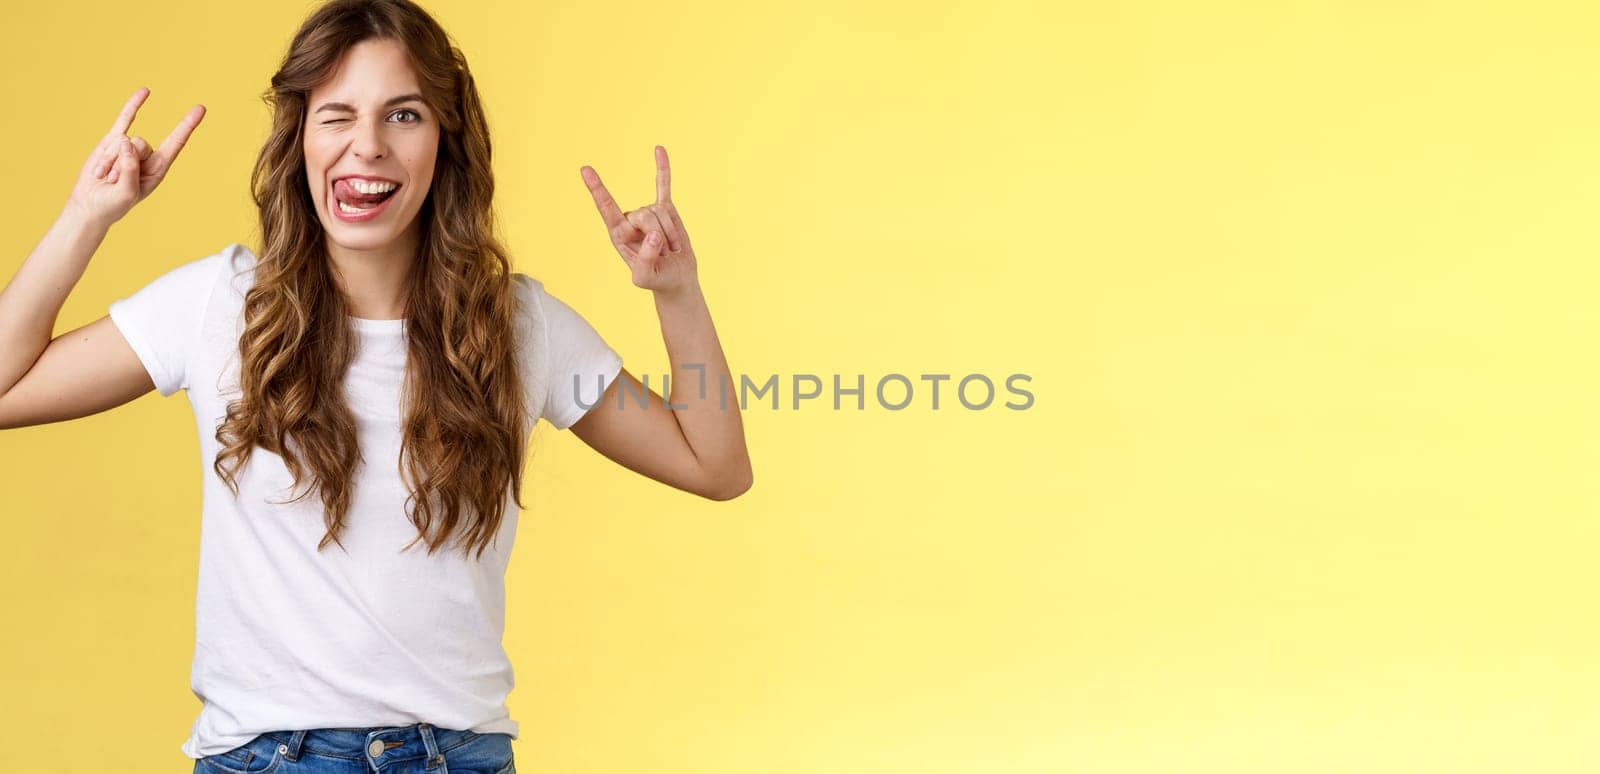 Awesome party having fun. Daring attractive carefree girl enjoy excellent event show rock-n-roll heavy metal gesture mimicking funny expressions wink stick tongue stand yellow background amused.